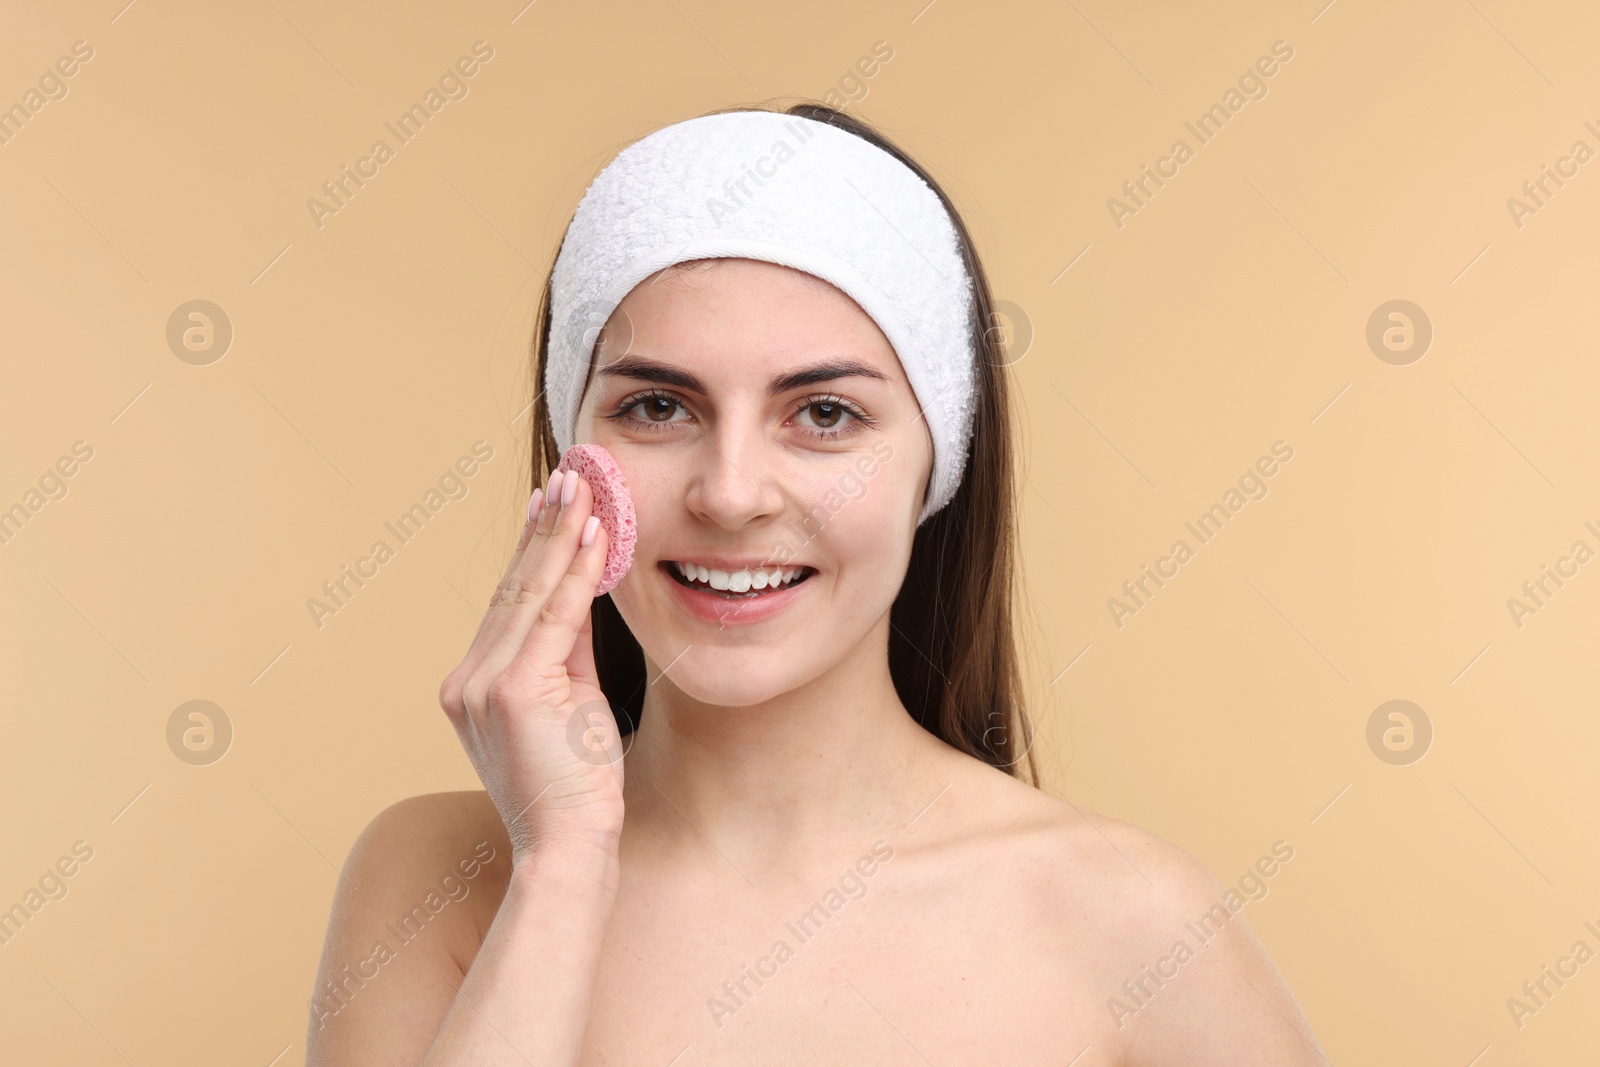 Photo of Young woman with headband washing her face using sponge on beige background